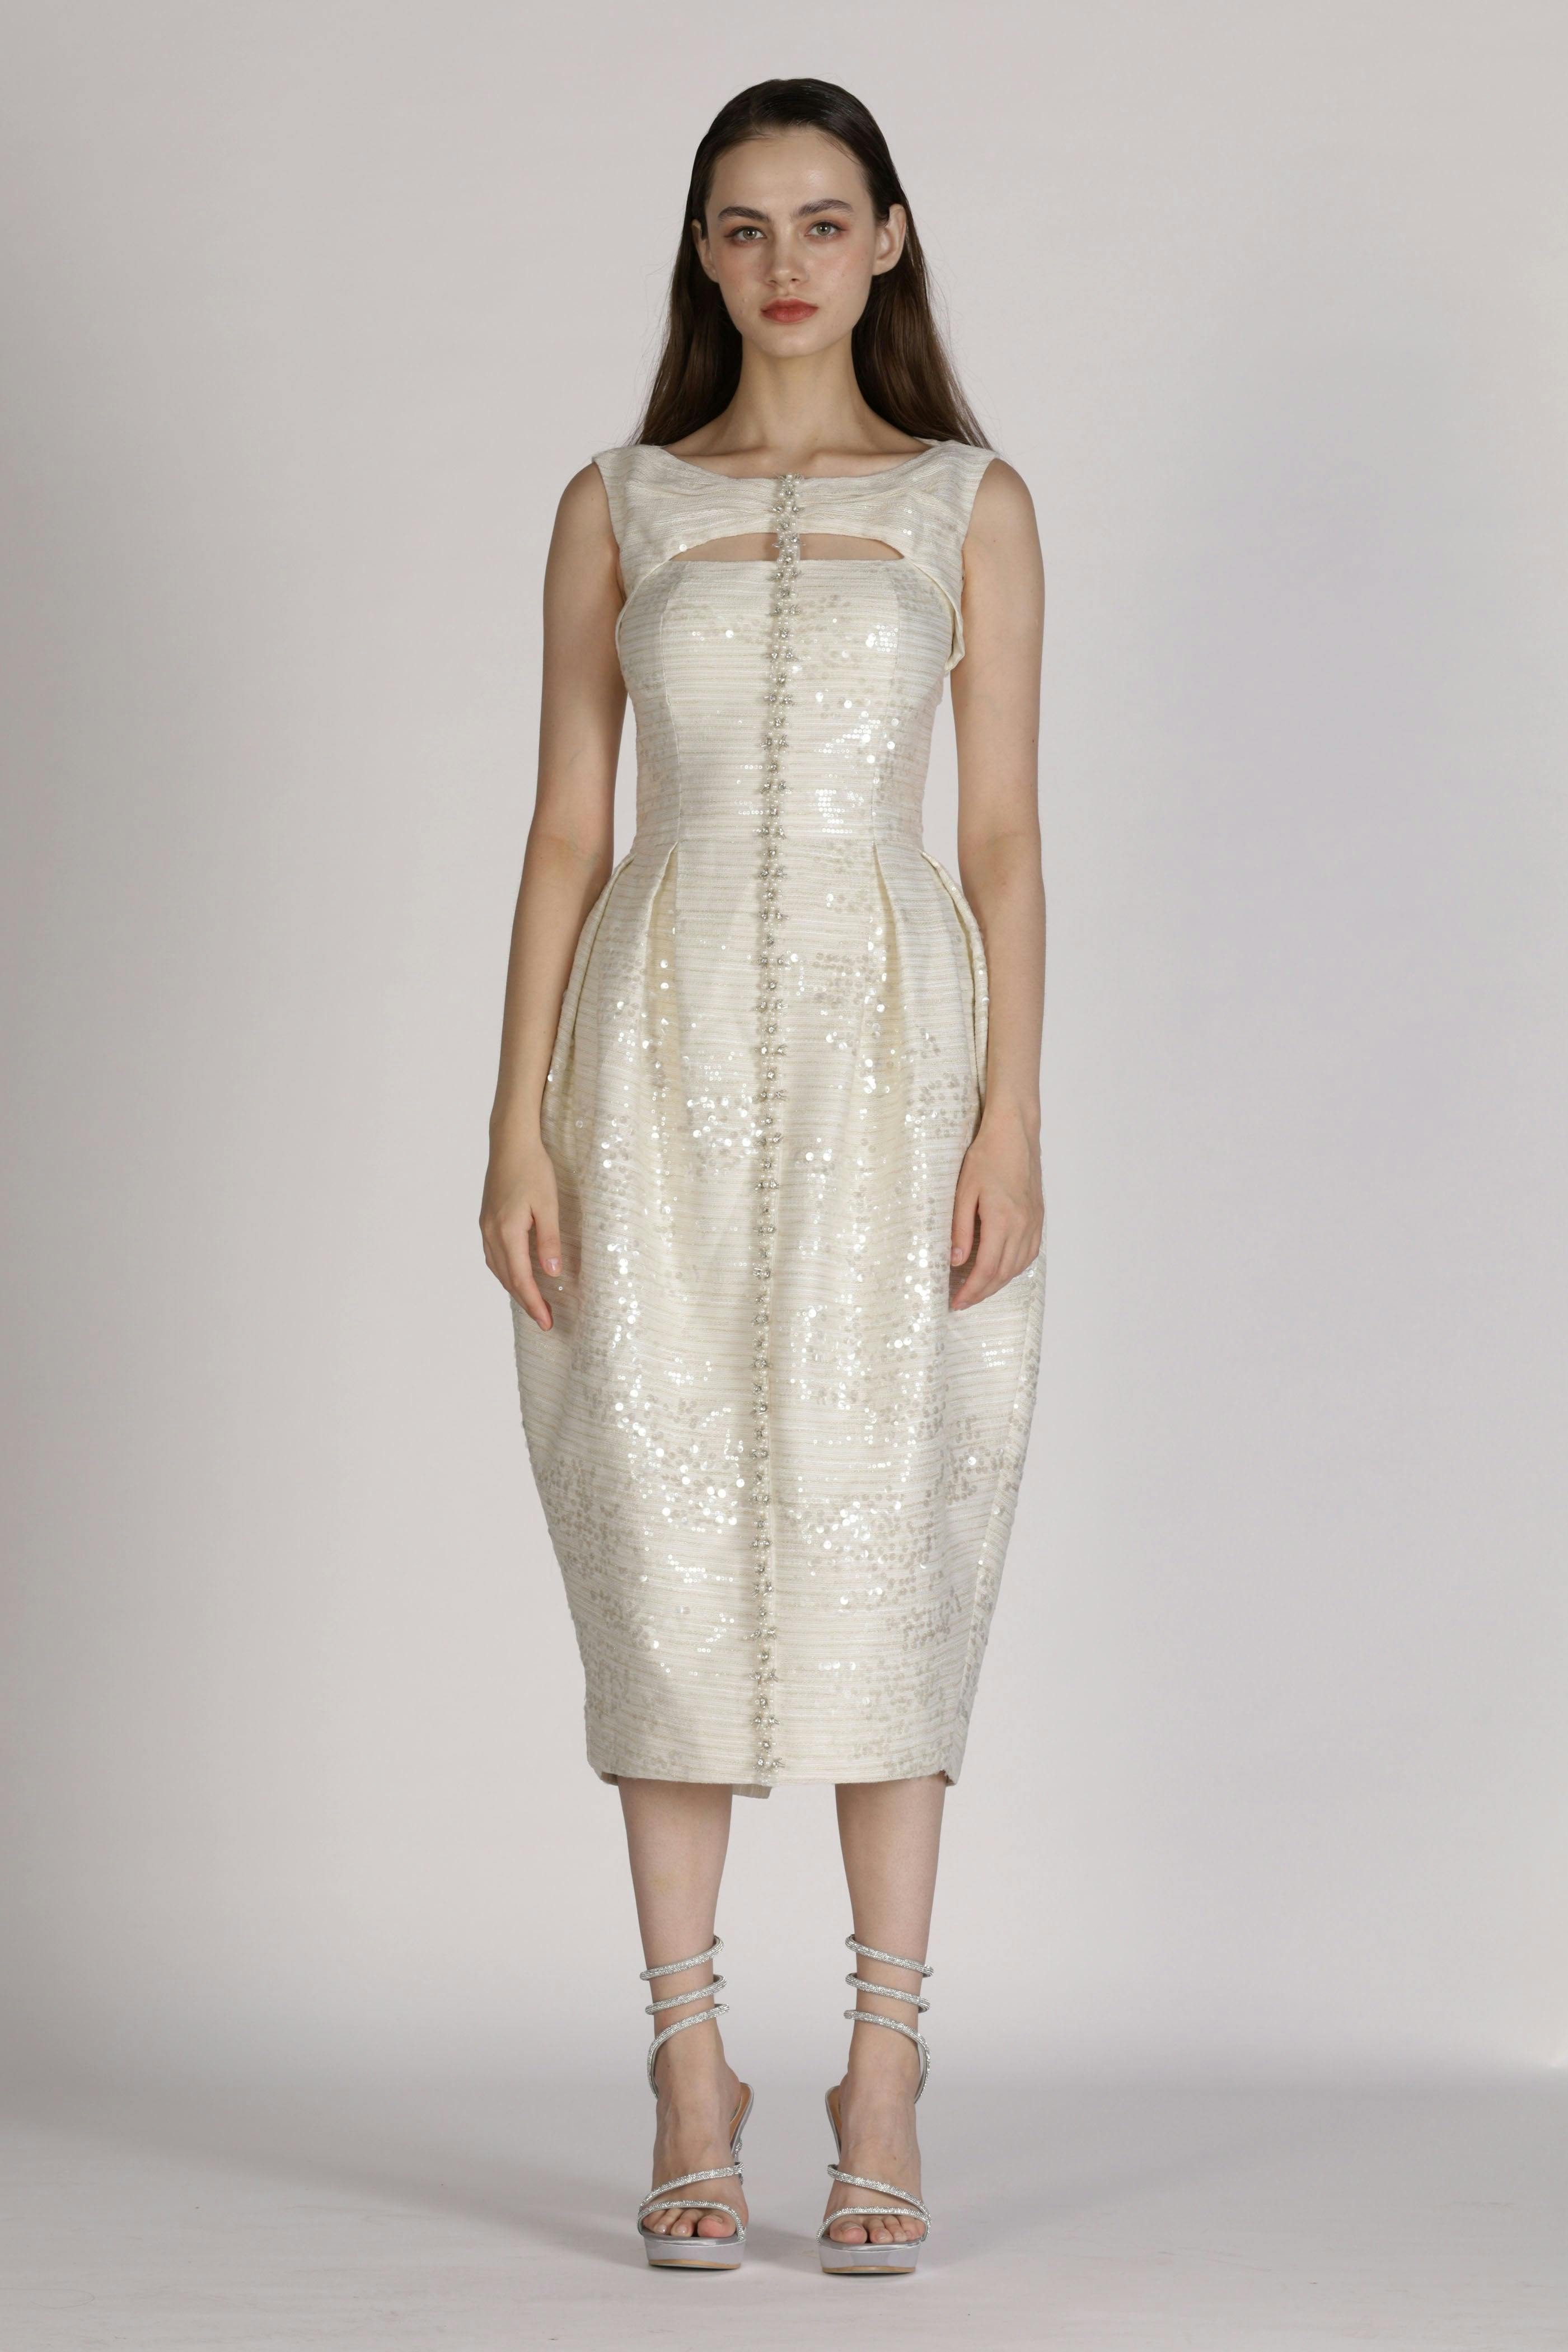 Embroidered Midi Dress, a product by SZMAN